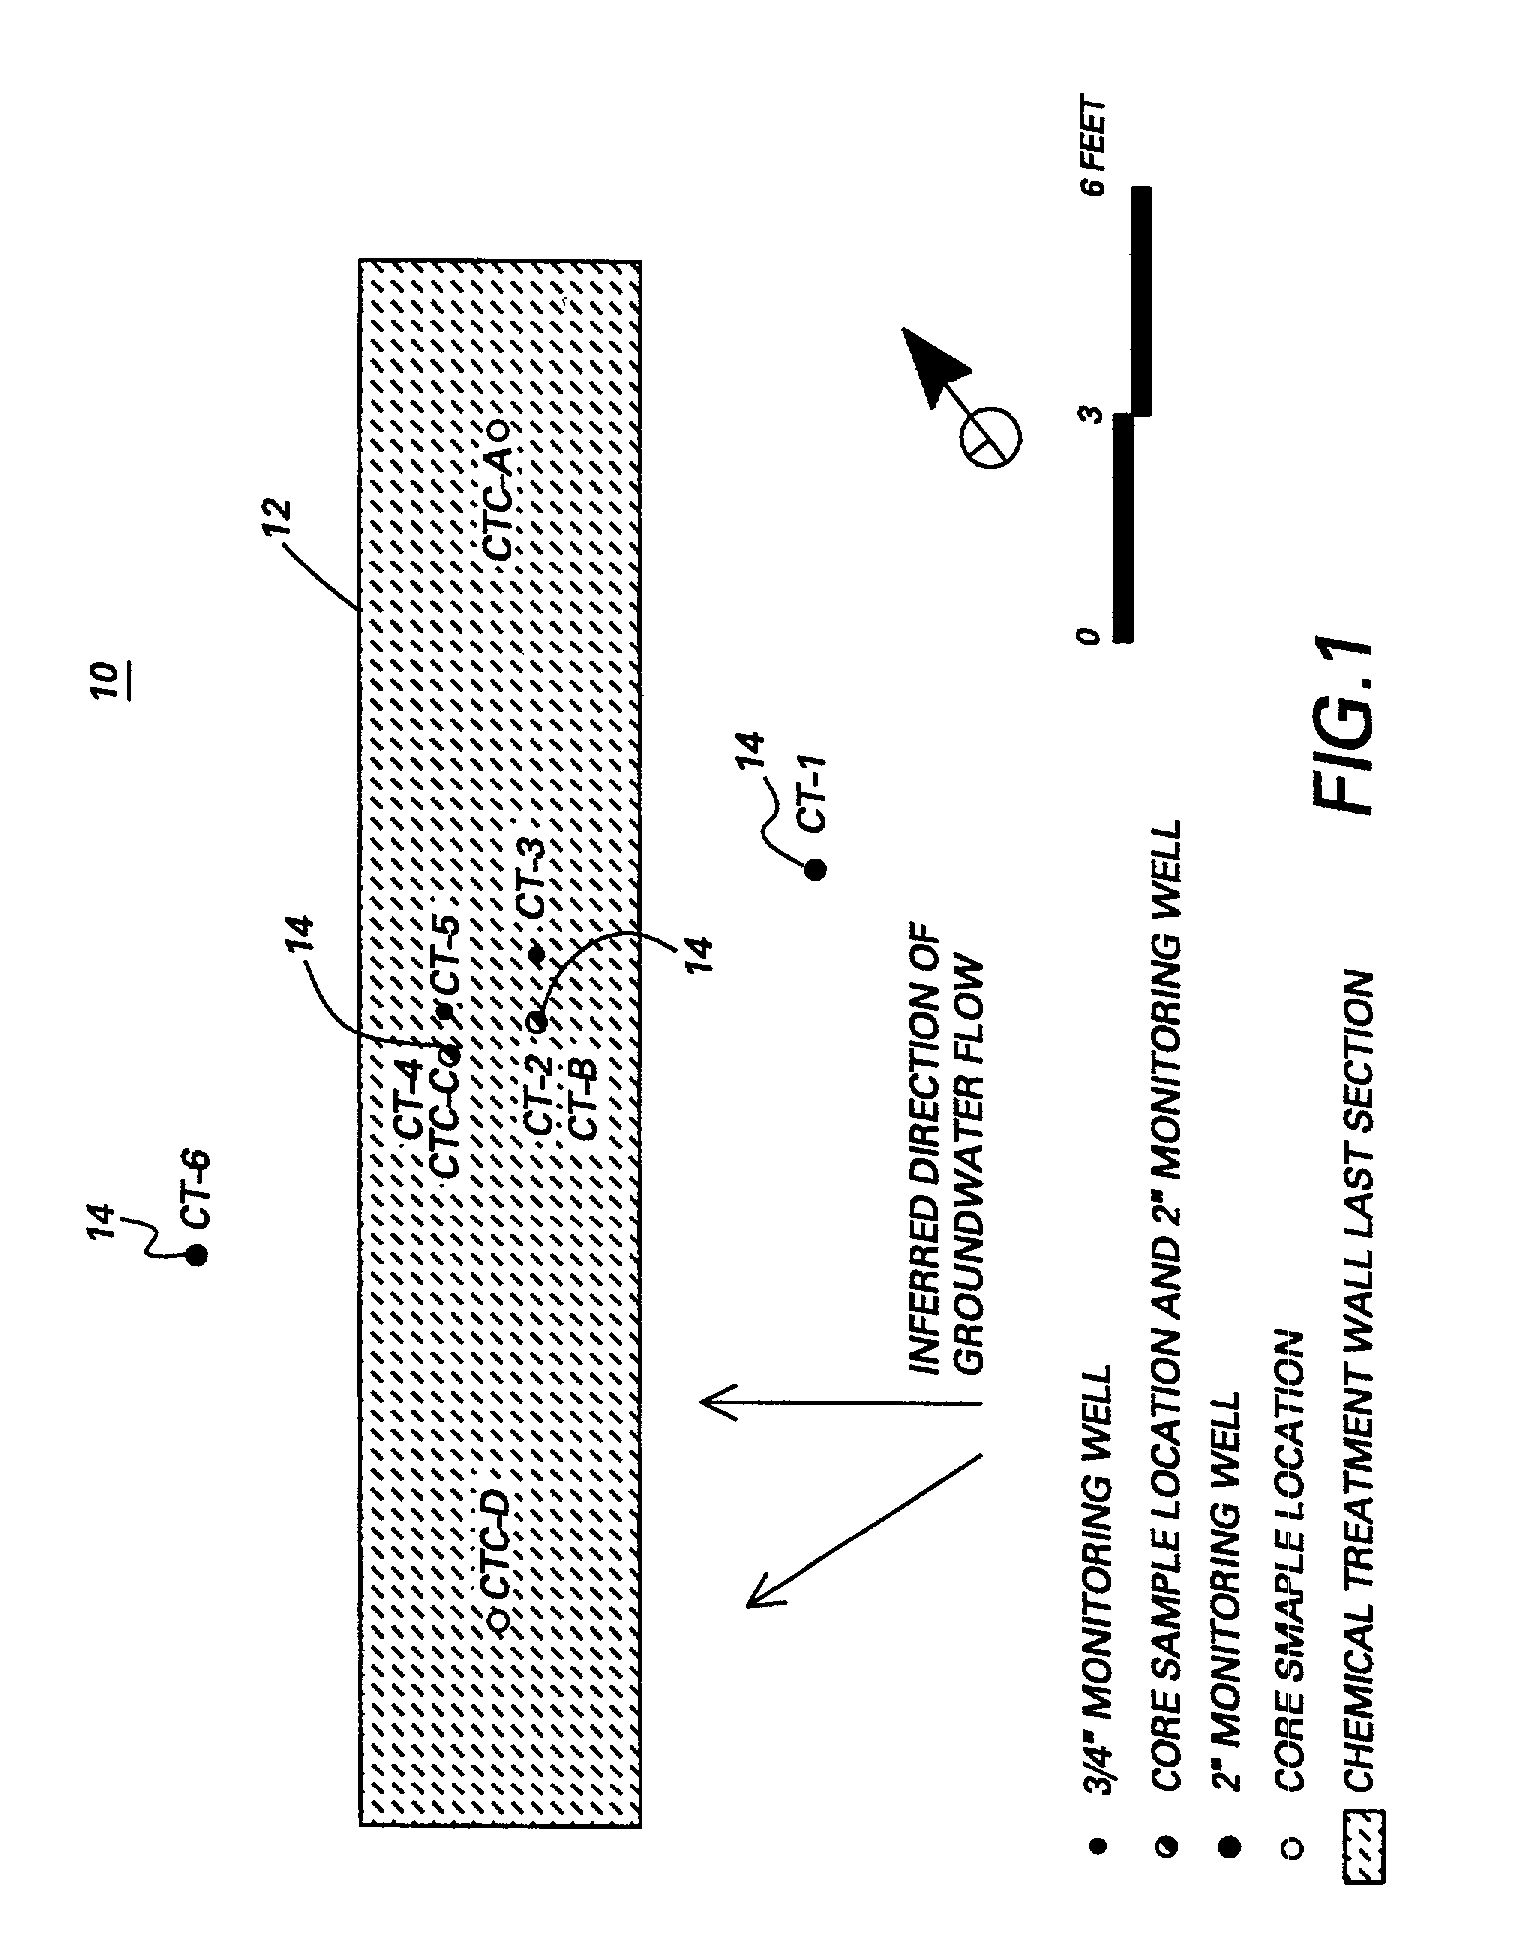 Permeable-reactive barrier monitoring method and system